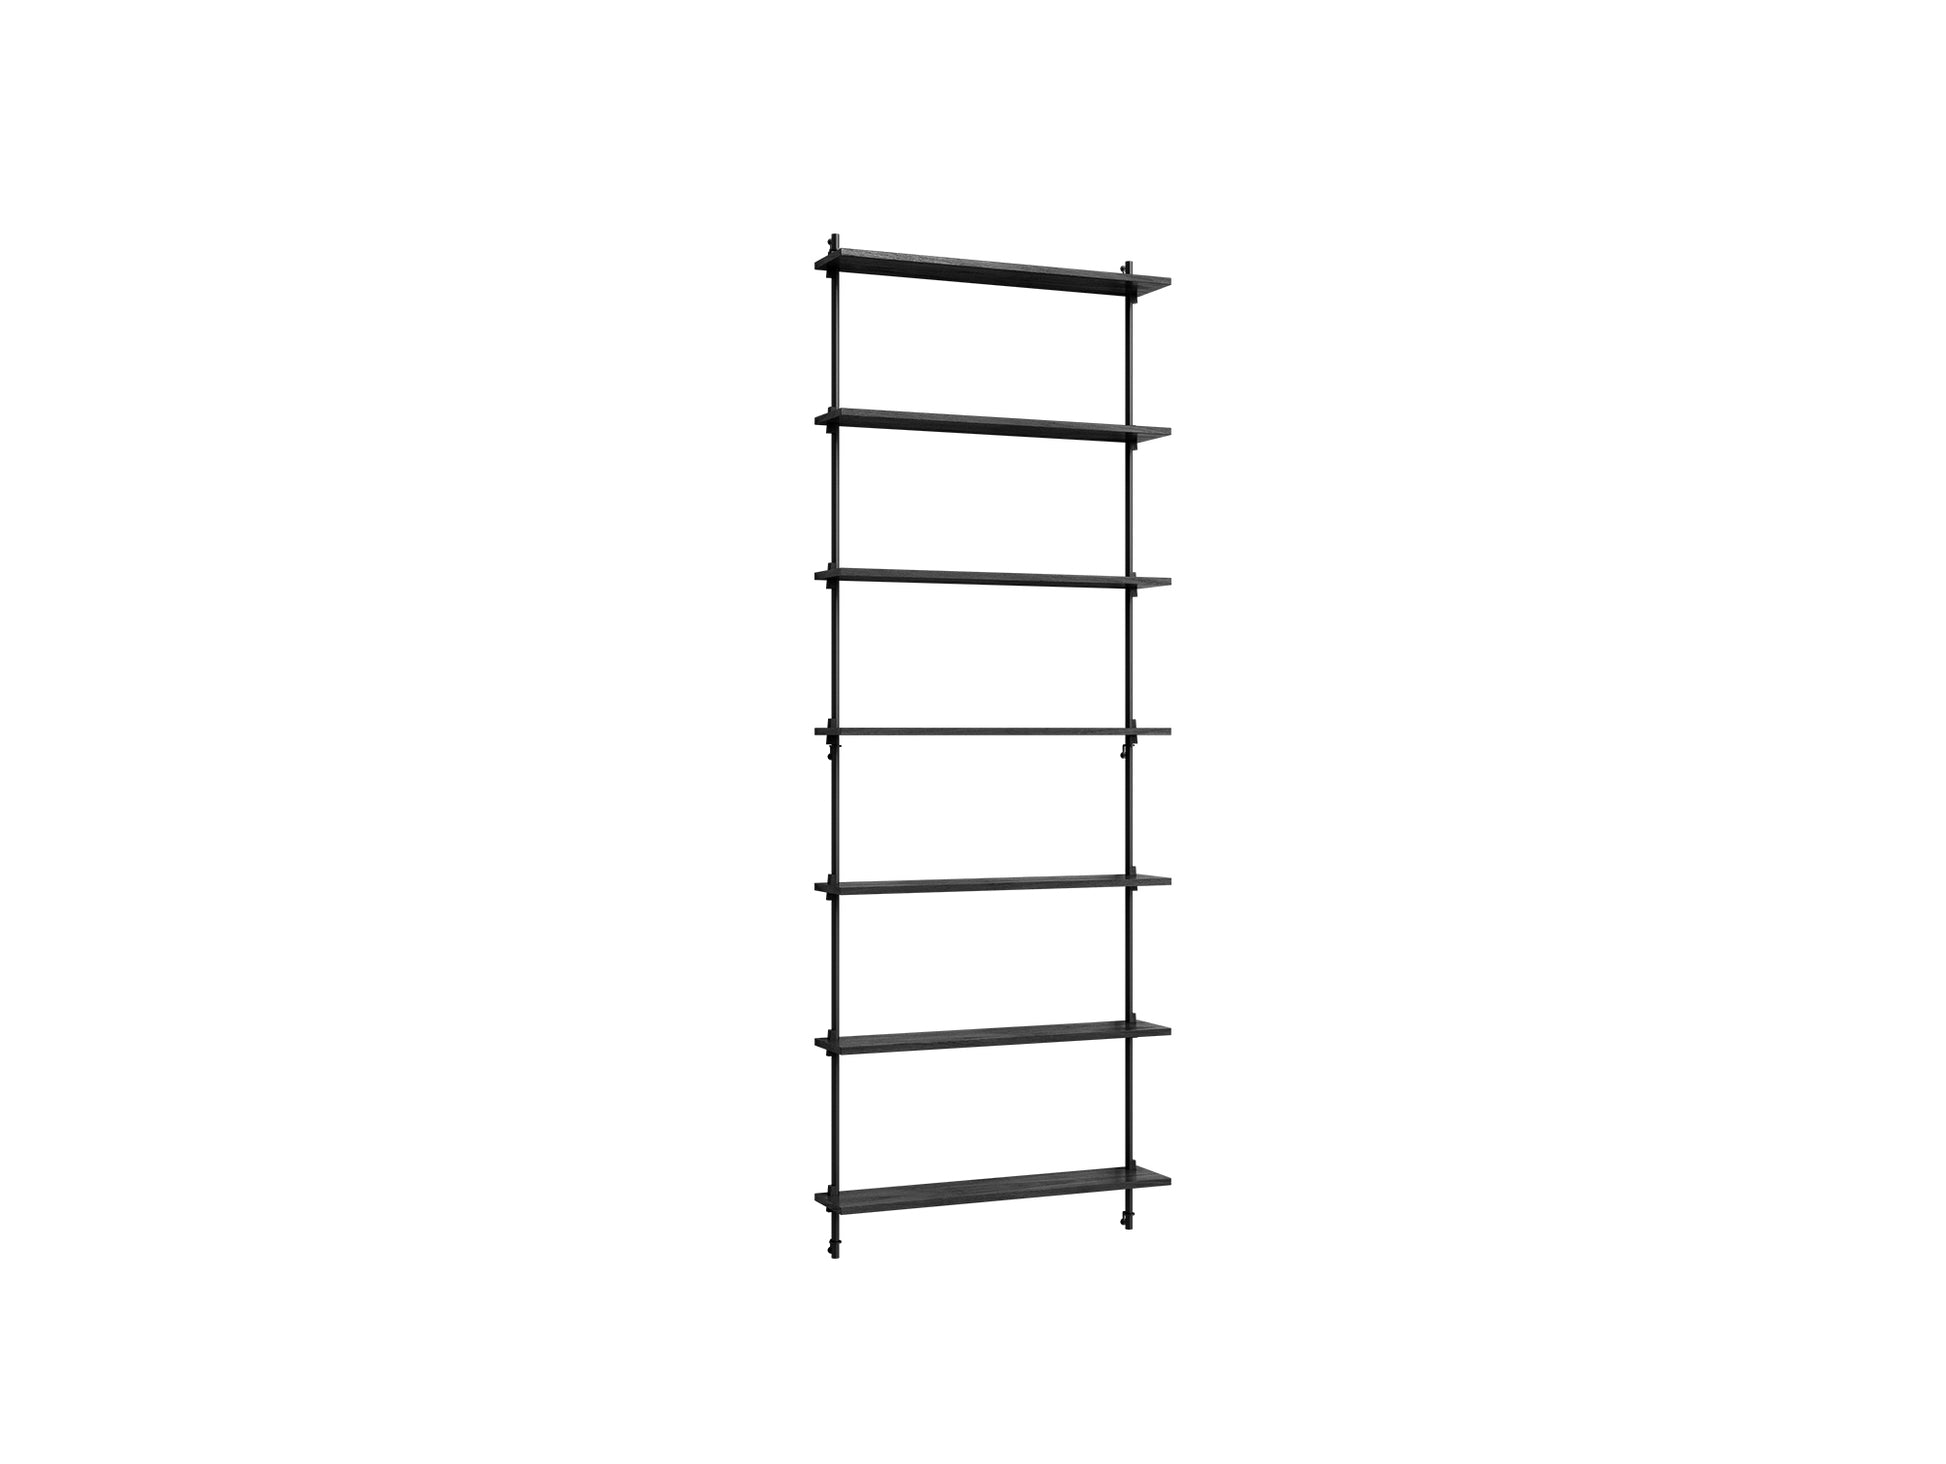 Wall Shelving System Sets (230 cm) by Moebe - WS.230.1 / Black Uprights / Black Painted Oak